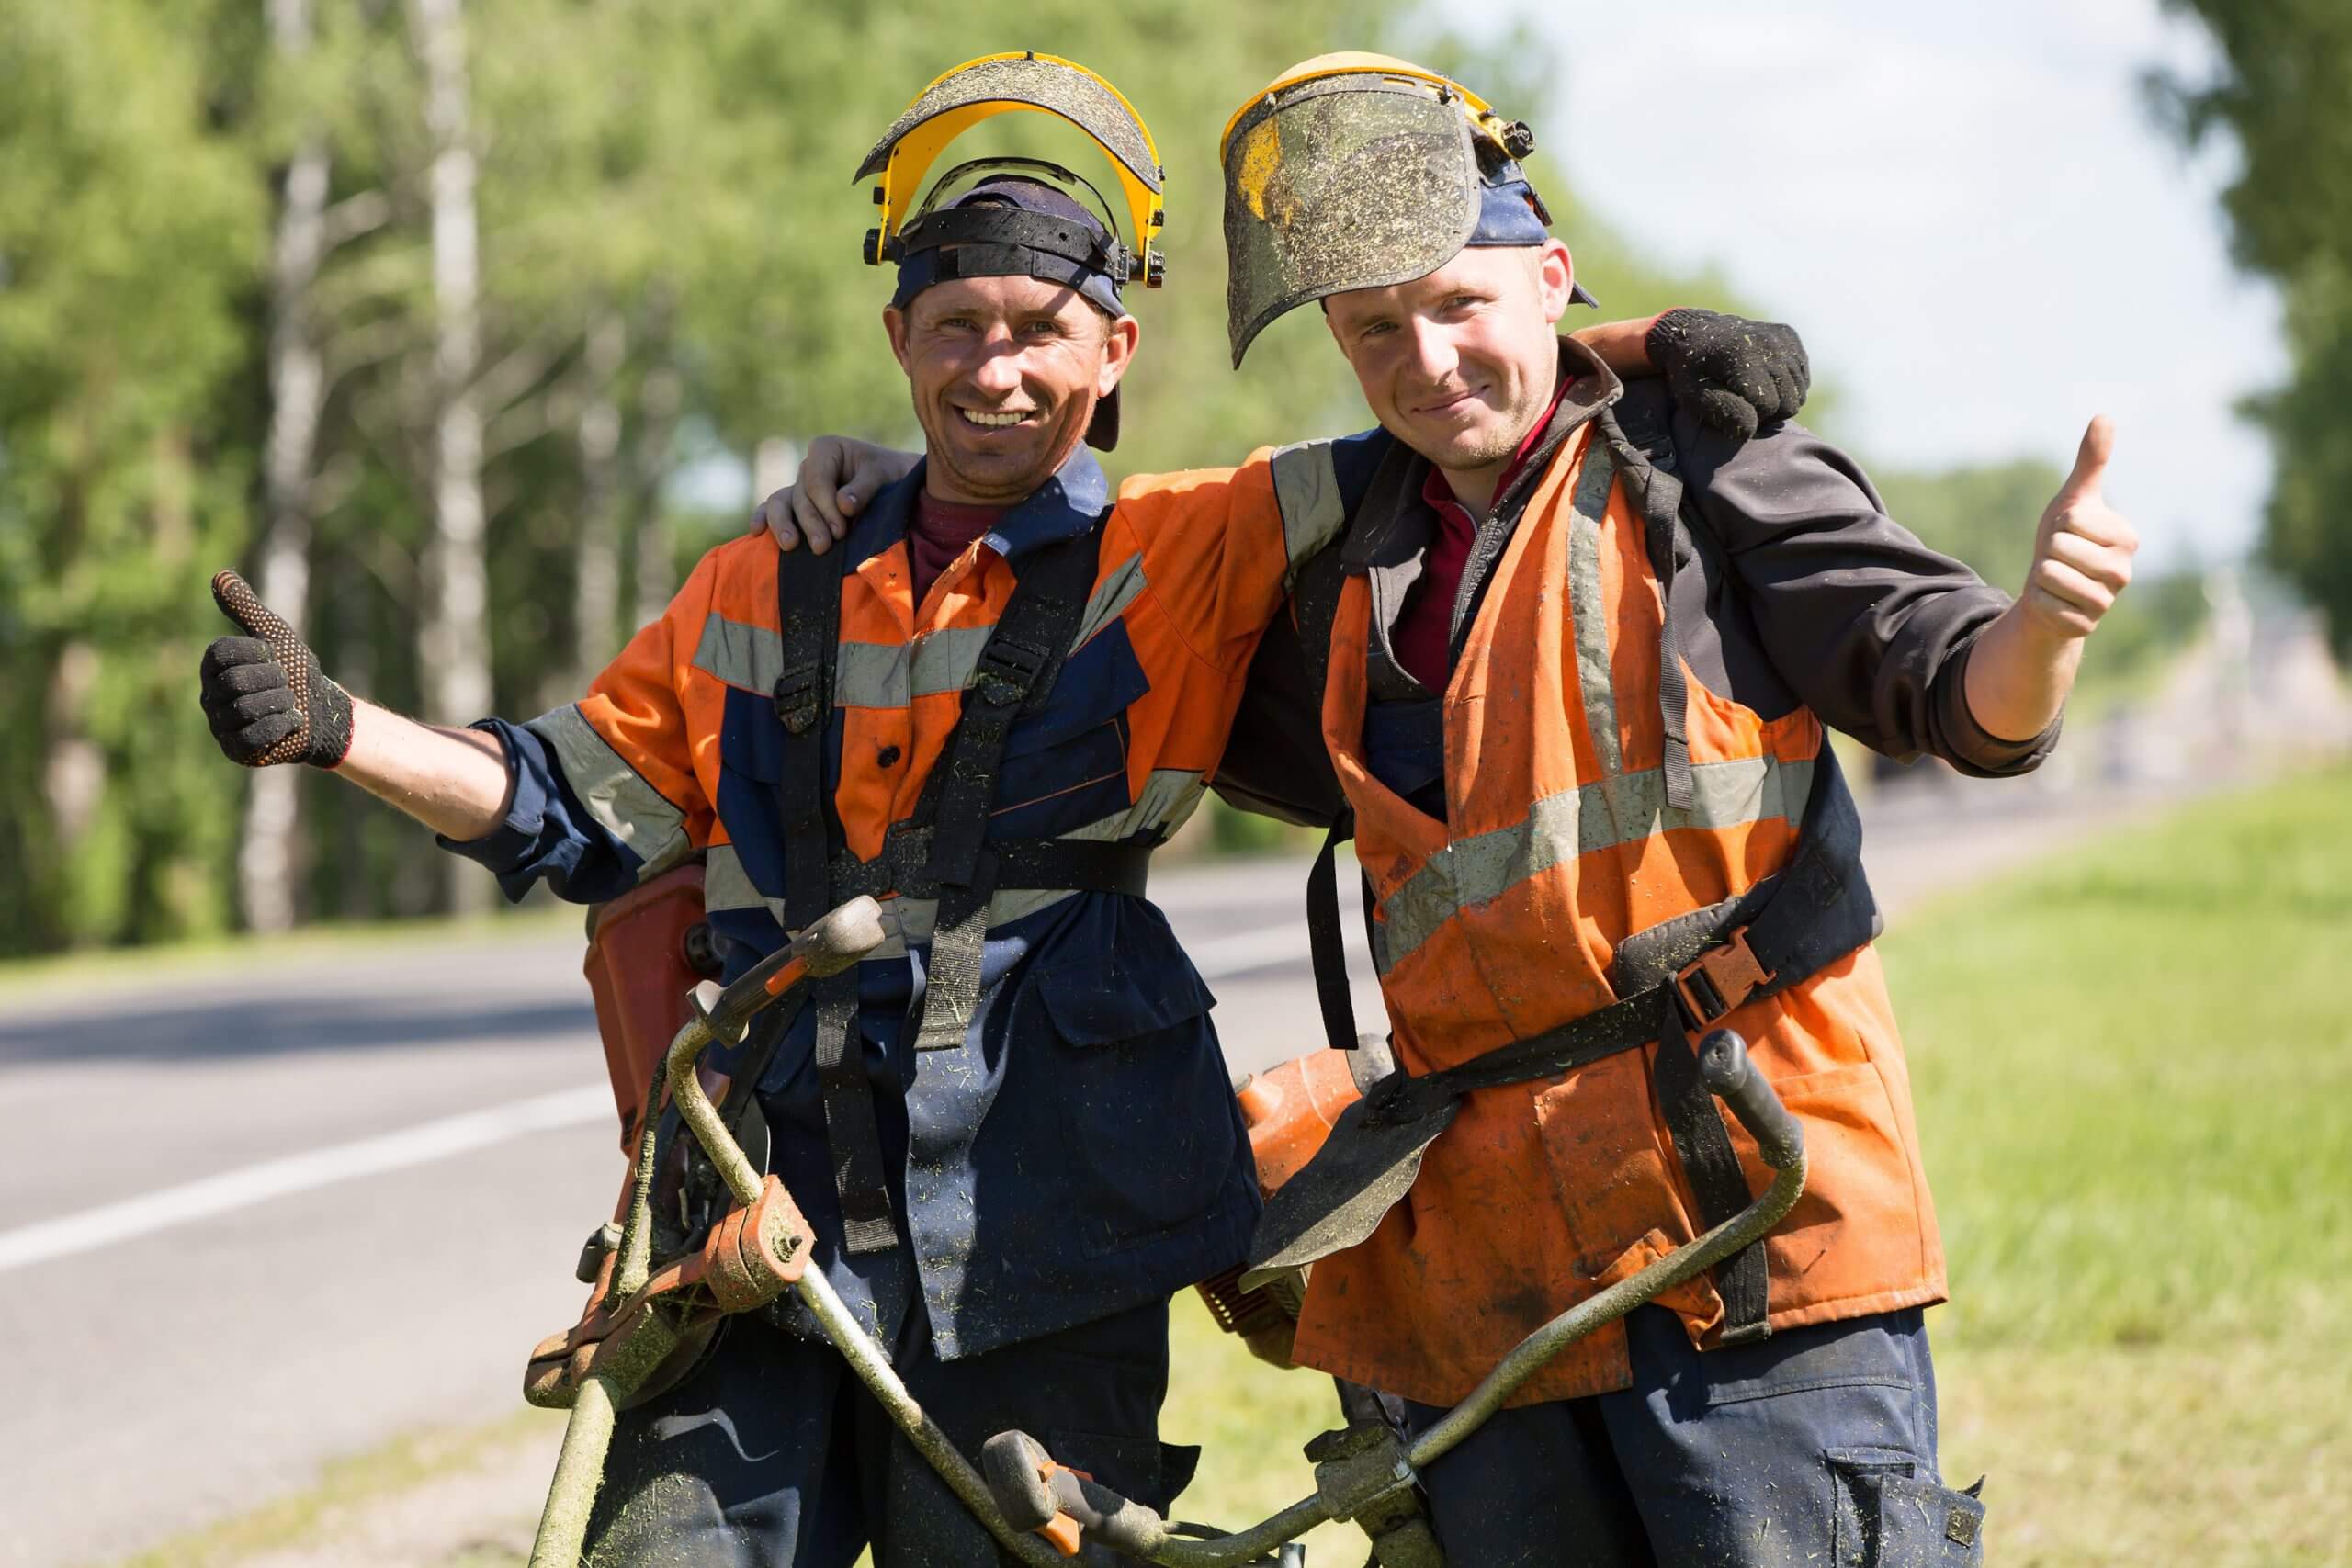 Happy road landscapers workers with string trimmers during grass cutting team works gesturing ok outdoors